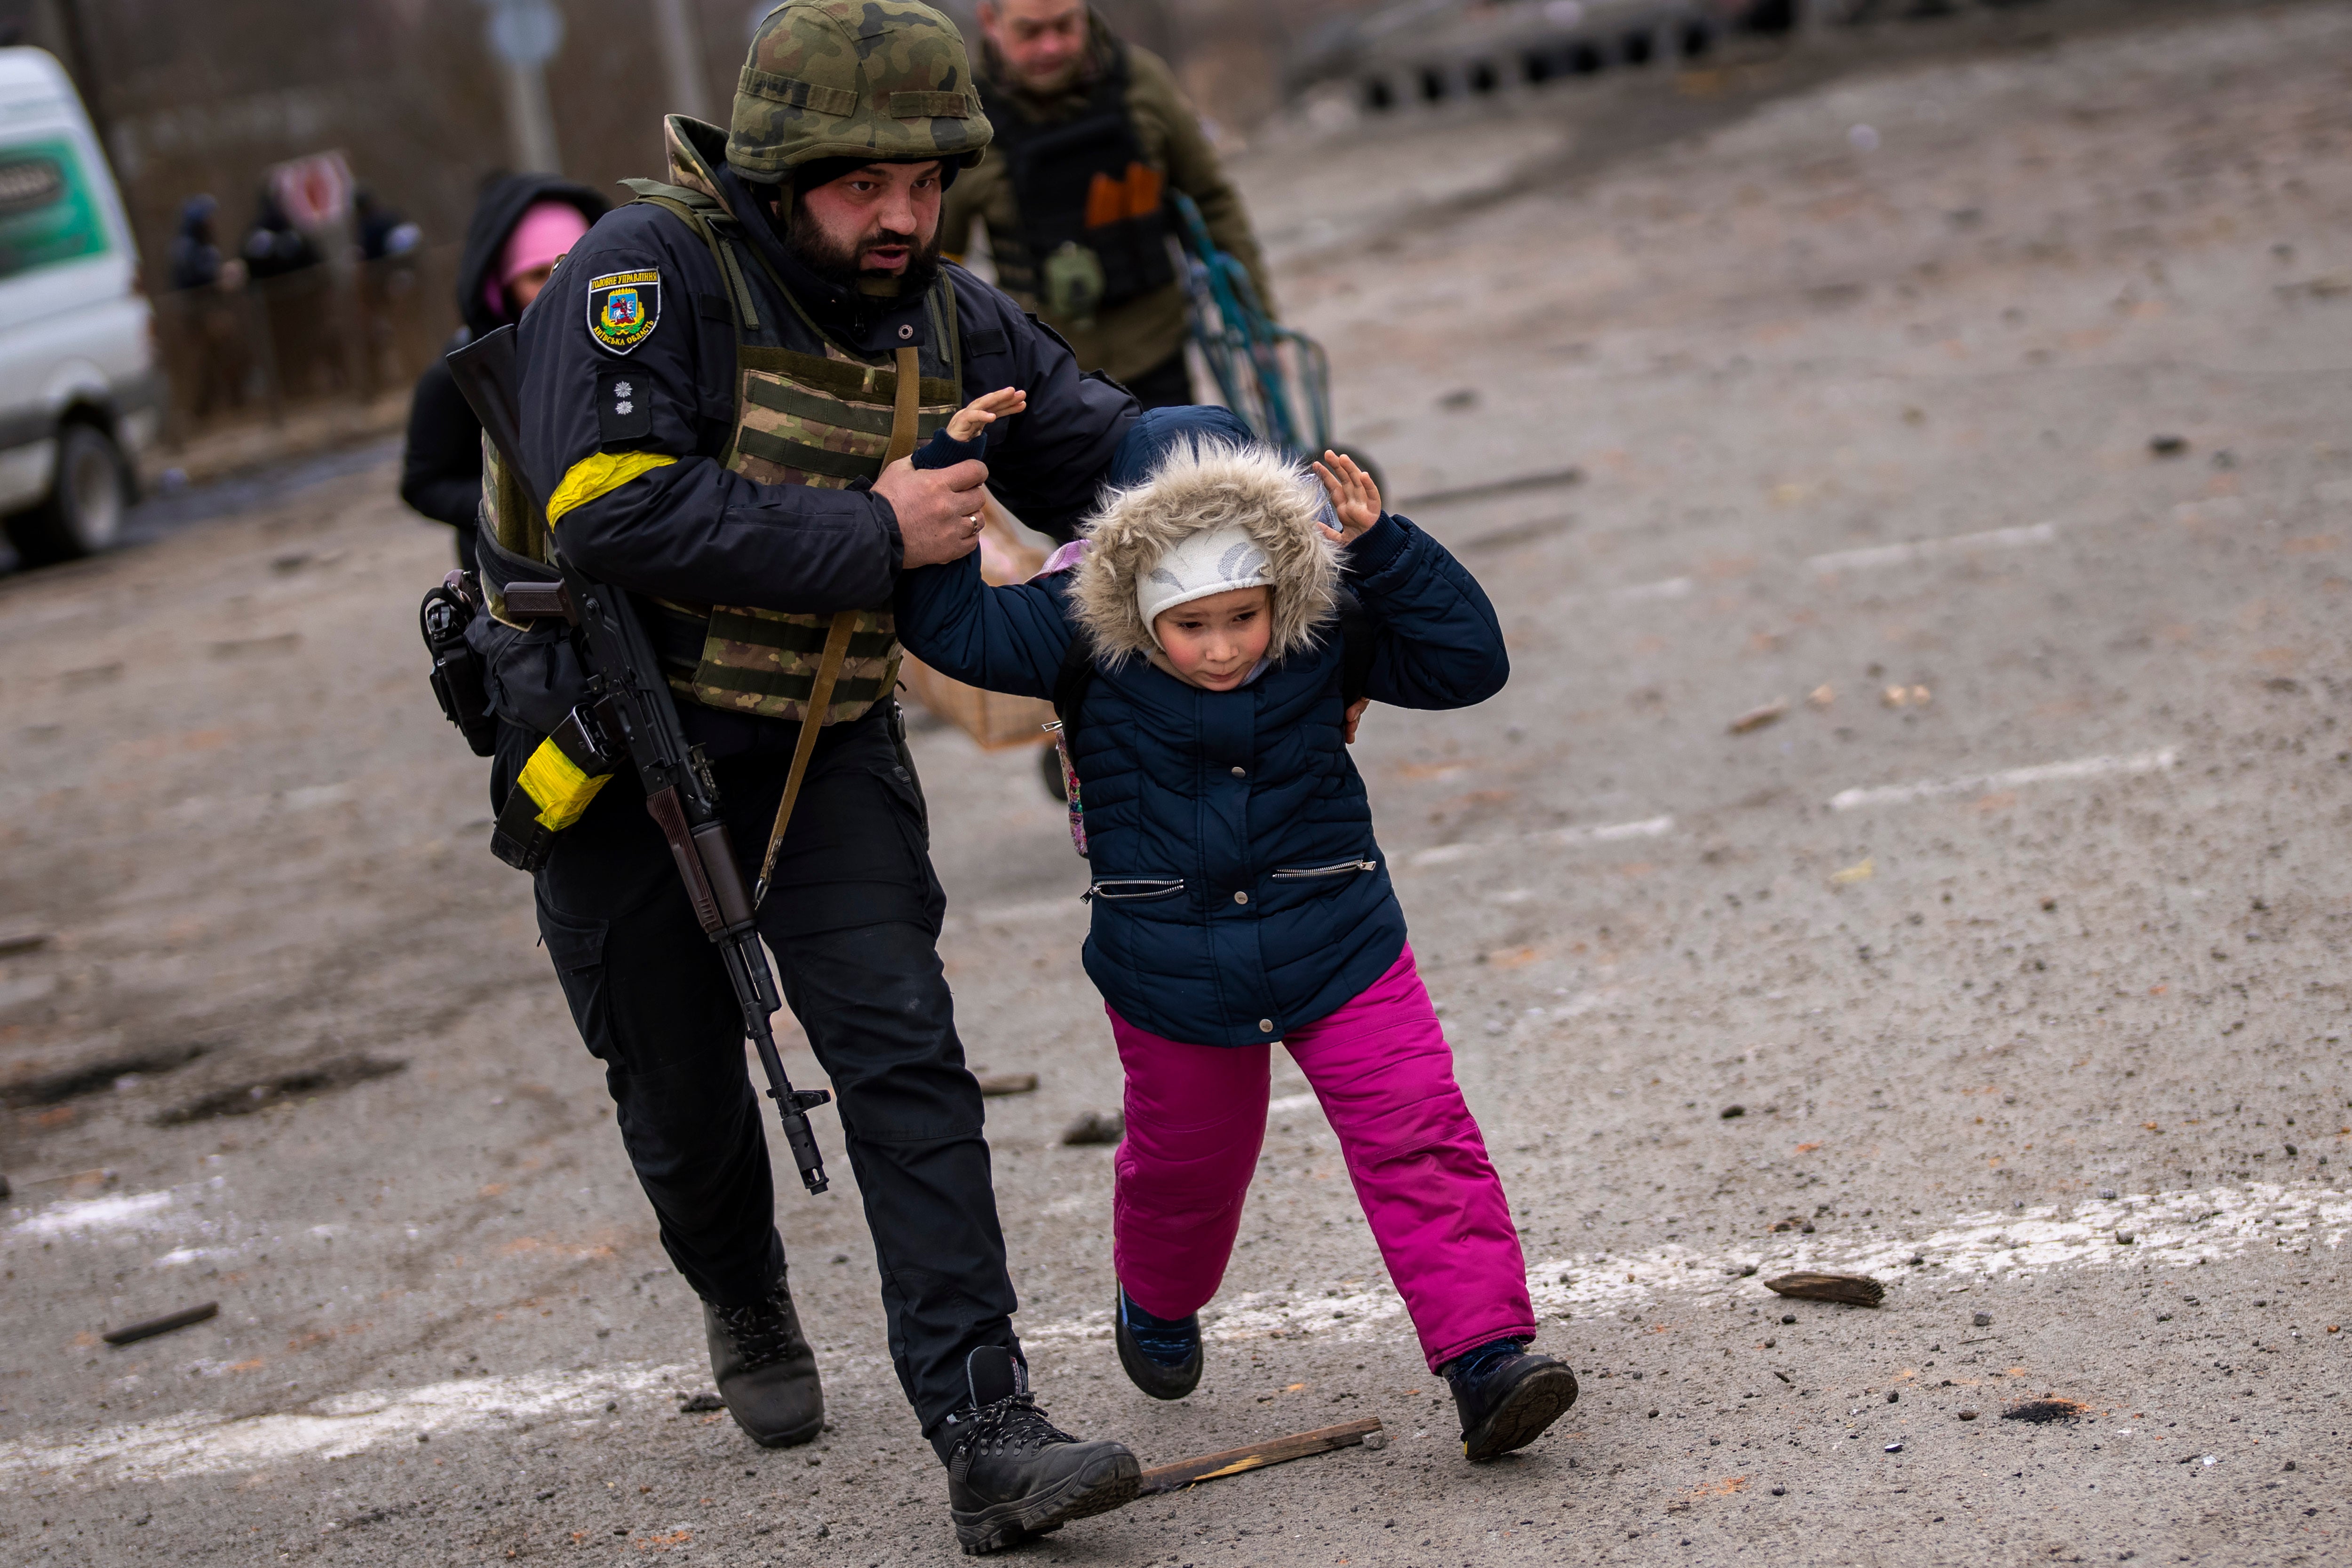 A Ukrainian police officer runs while holding a child as the artillery echoes nearby, while fleeing Irpin on the outskirts of Kyiv, Ukraine